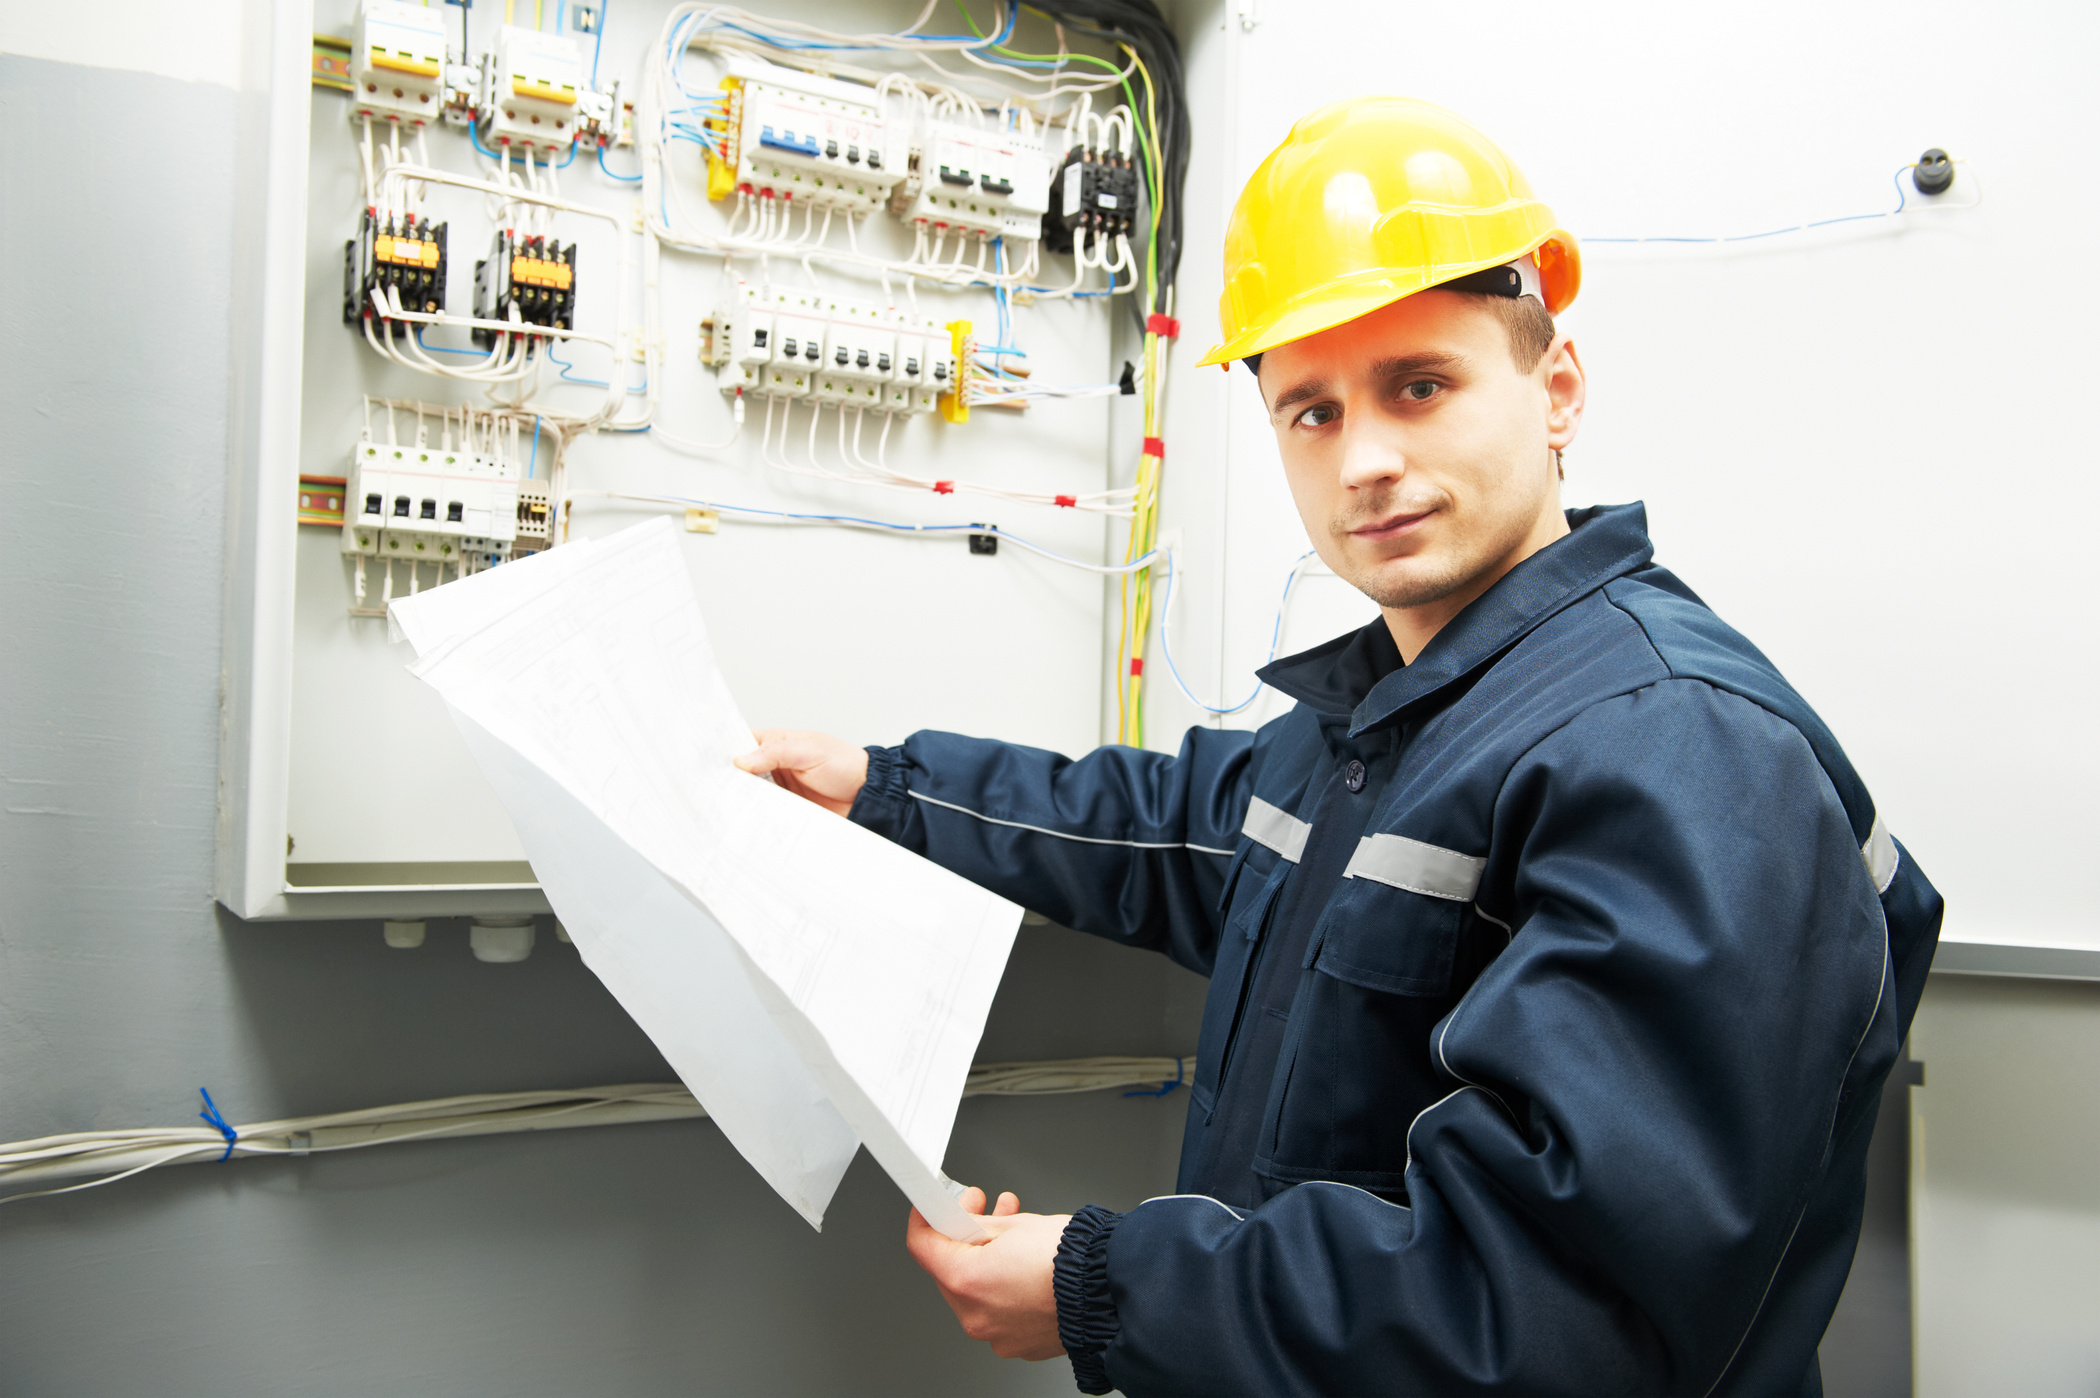 Electrician Engineer Worker with Blueprint Project